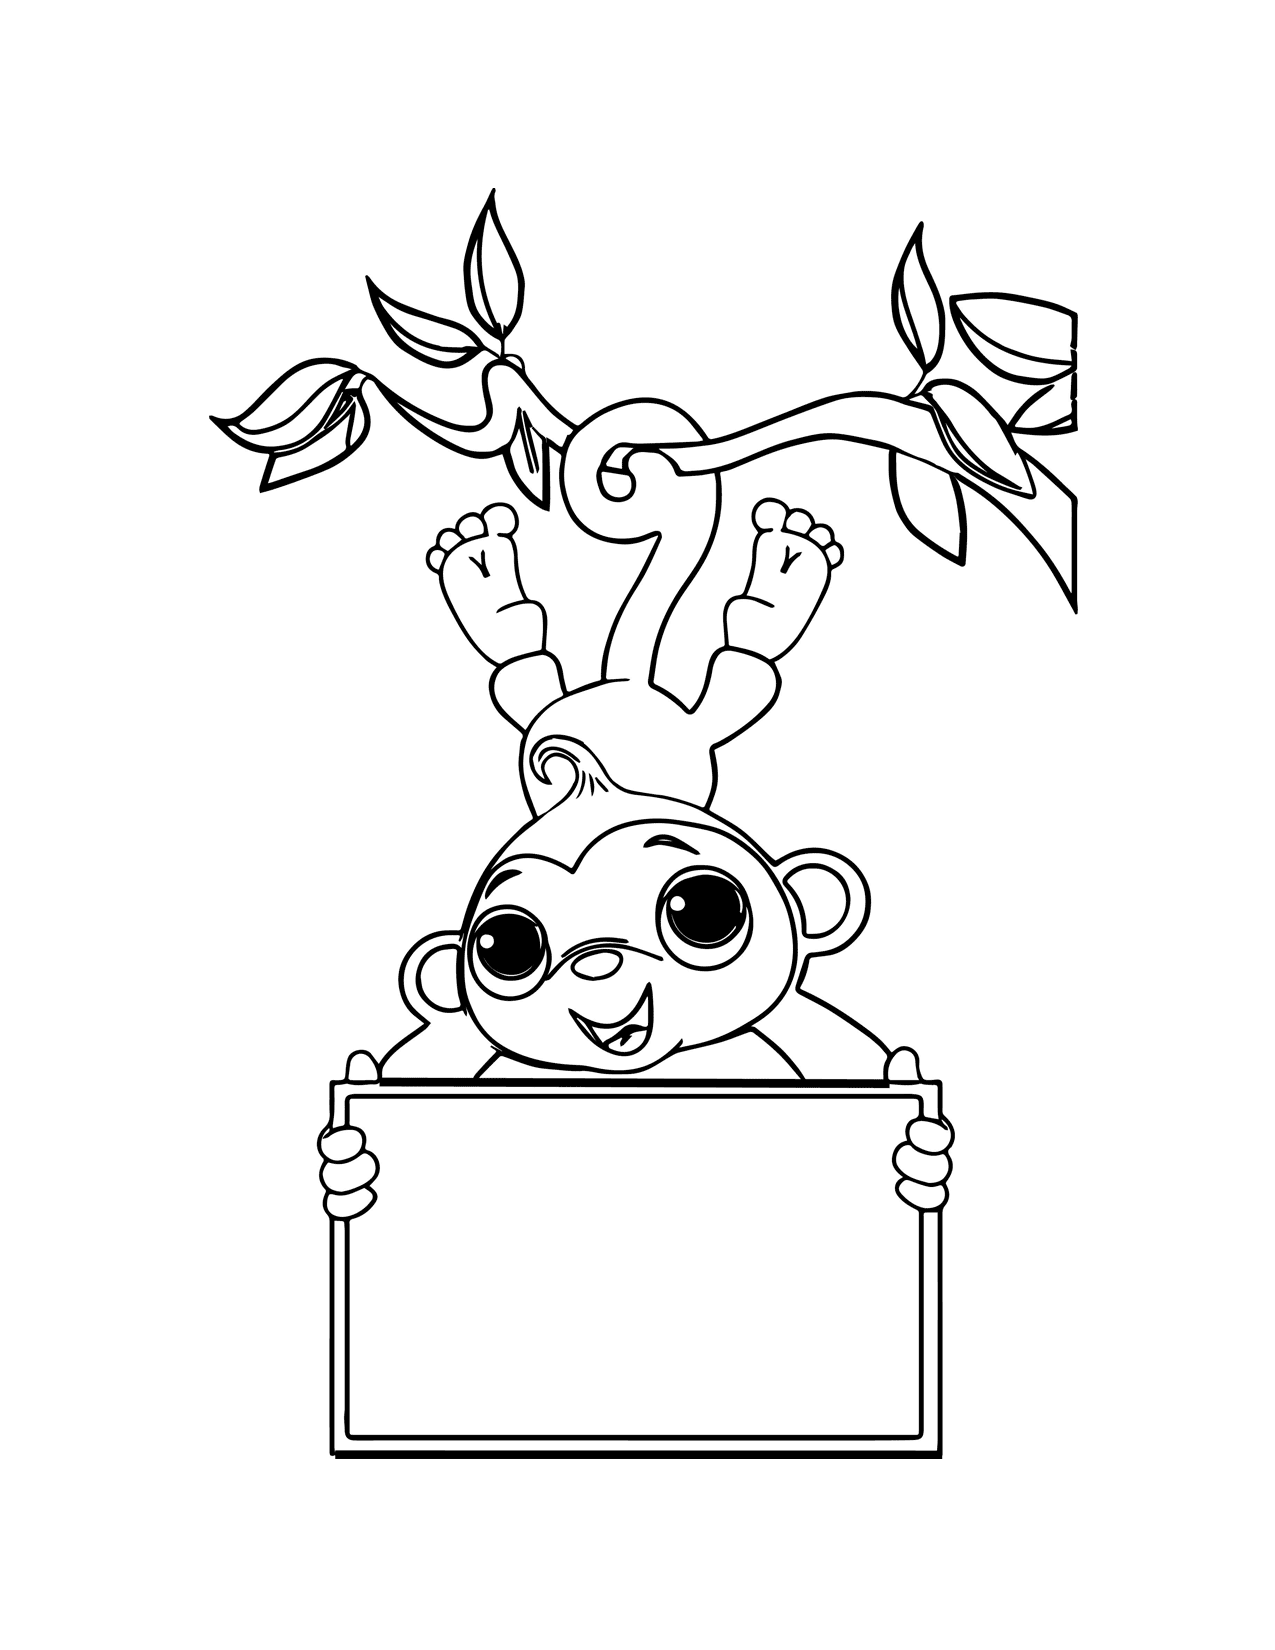 Monkey Holding Blank Sign Coloring Page